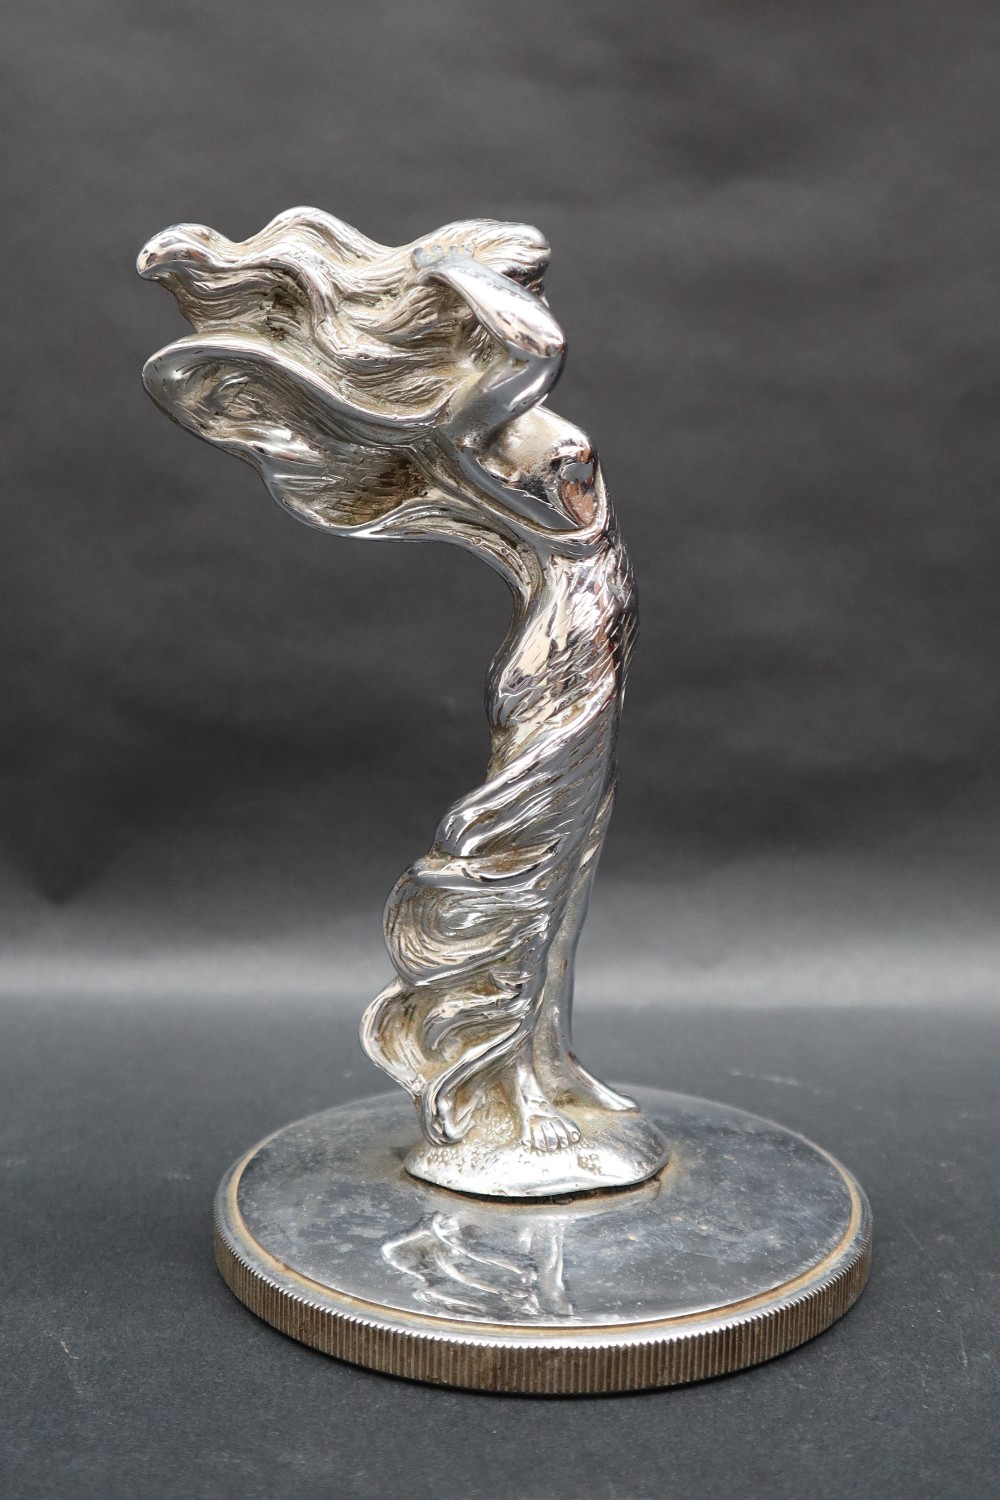 A chrome car / truck mascot of a maiden with flowing hair and arms raised, - Image 3 of 6